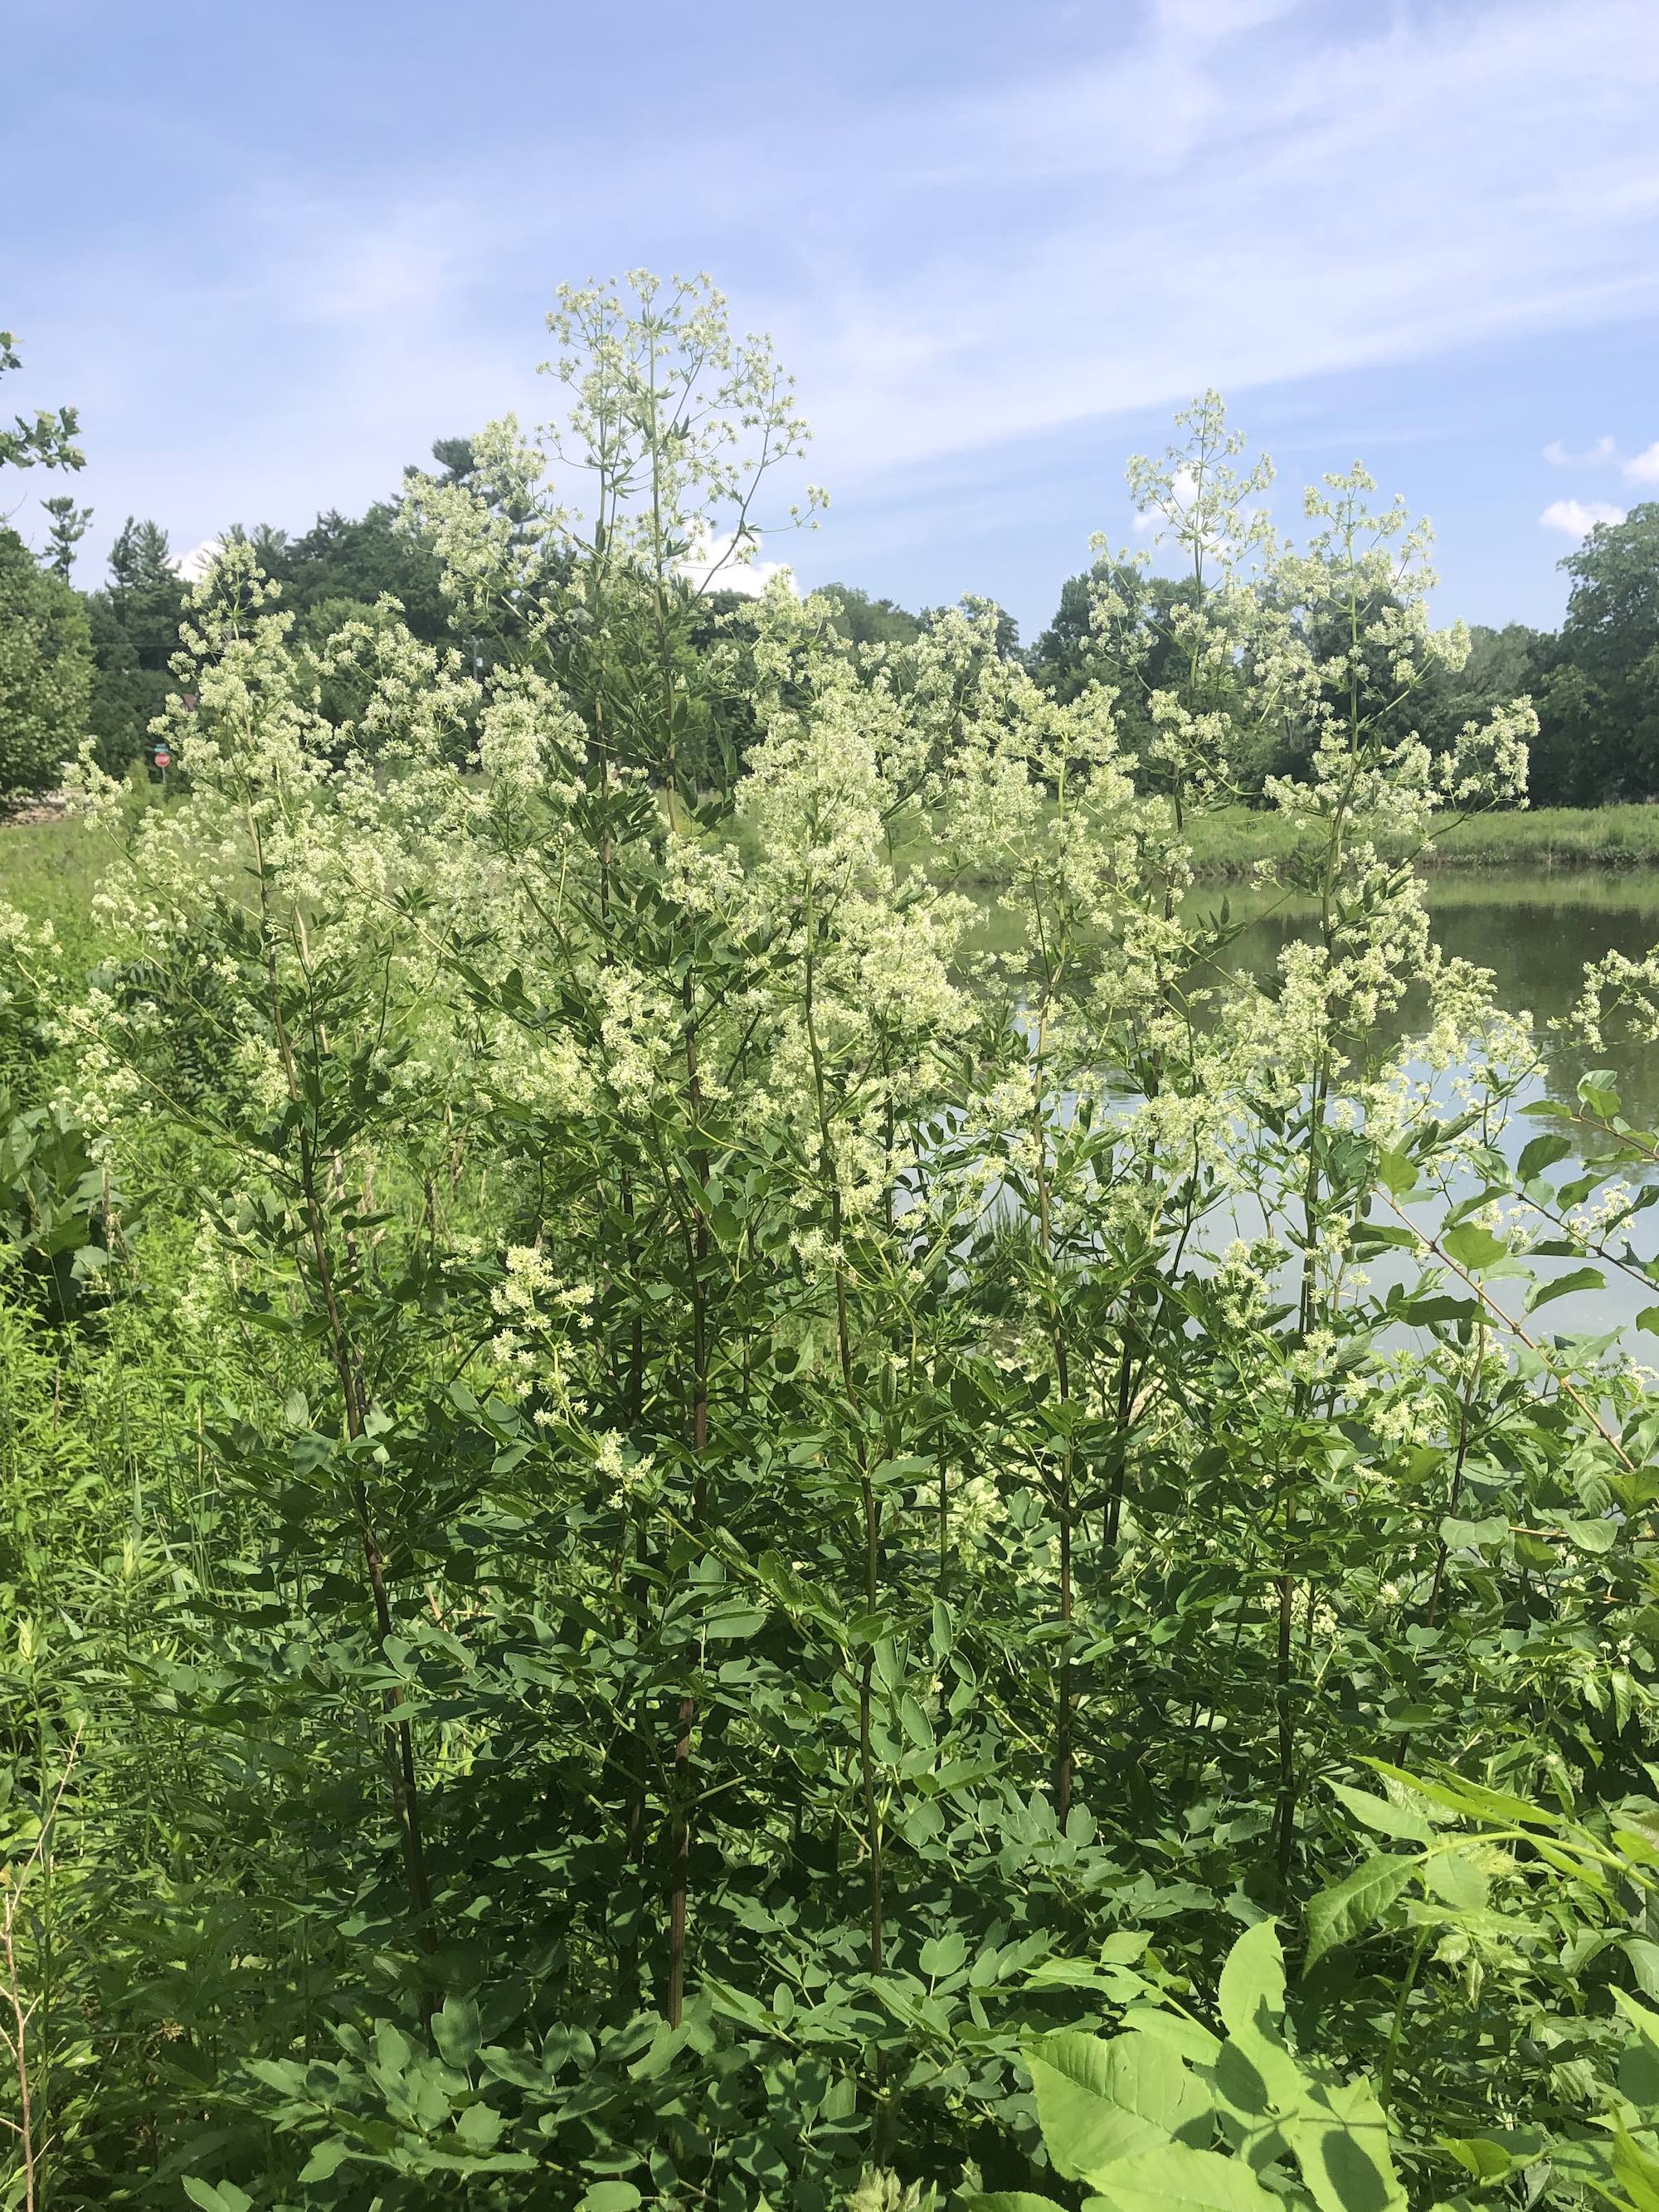 Tall Meadow-rue on shore of Retaining Pond on July 1, 2020.